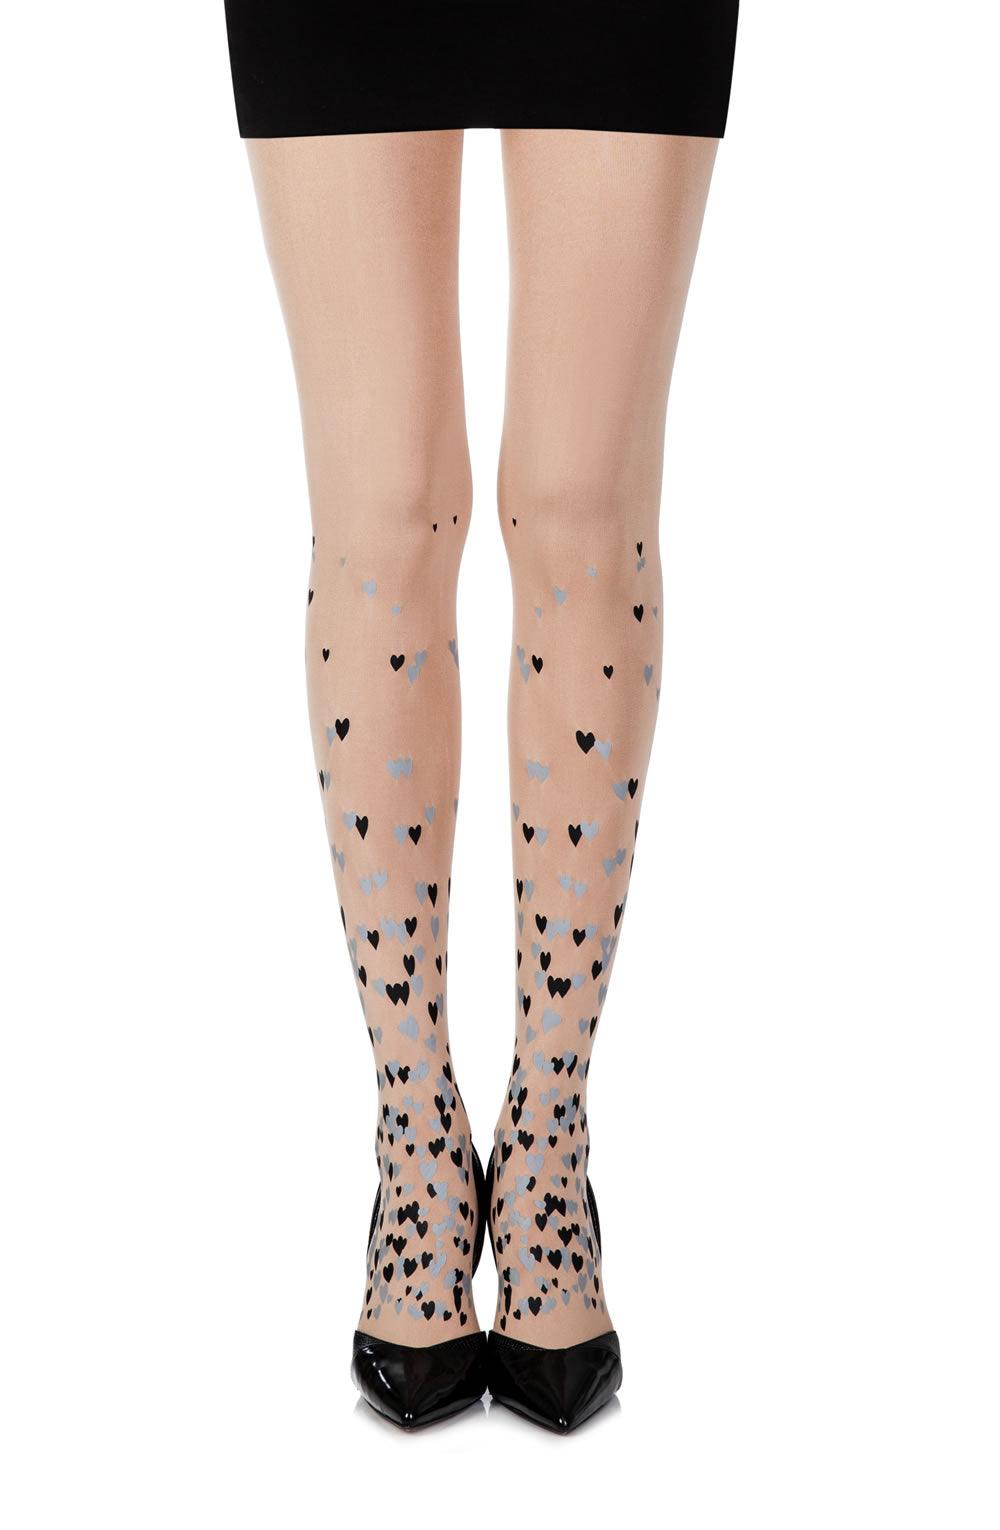 Zohara "Queen Of Hearts" Powder Print Tights - Sydney Rose Lingerie 